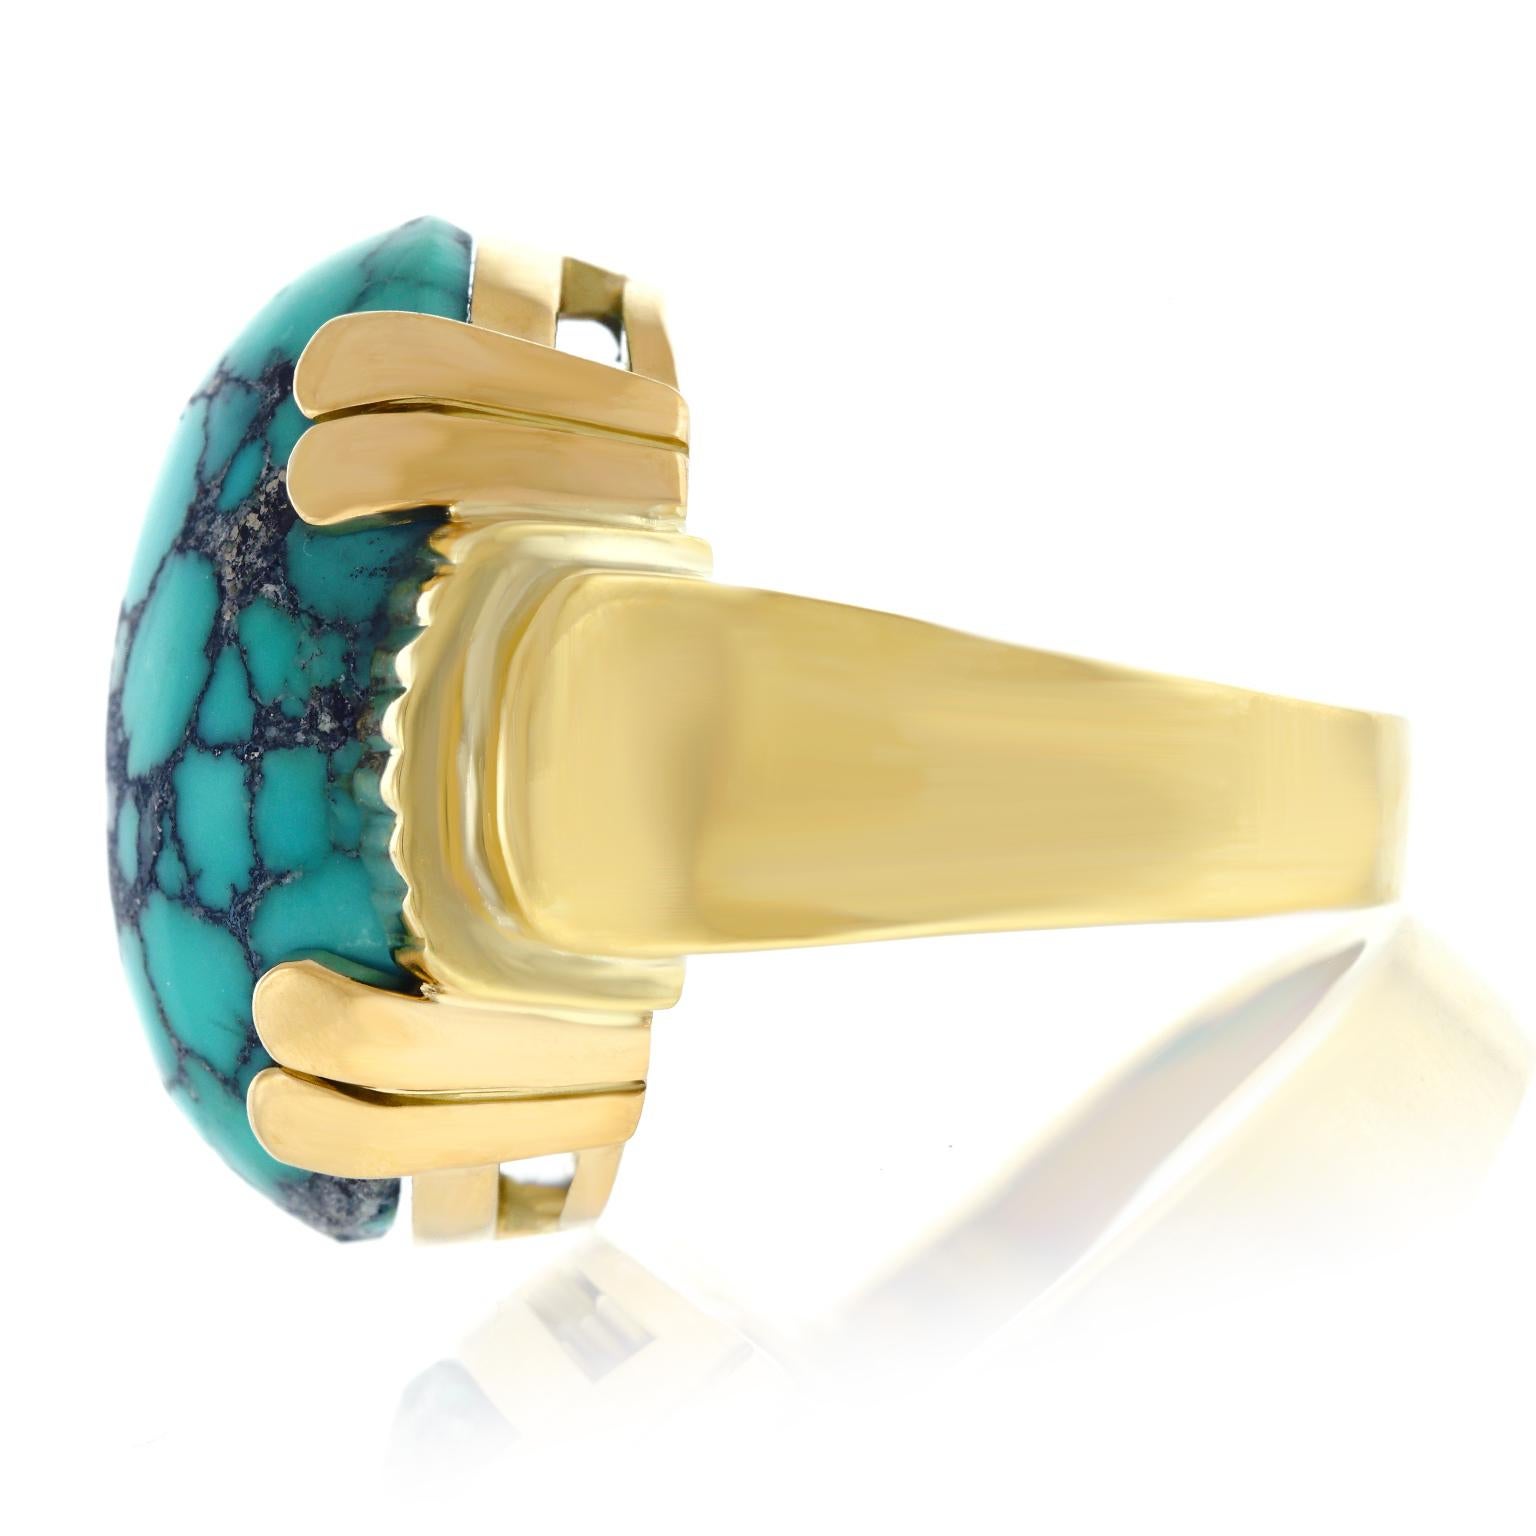 Lawrence Jeffrey Modernist Turquoise and Gold Ring im Zustand „Hervorragend“ in Litchfield, CT